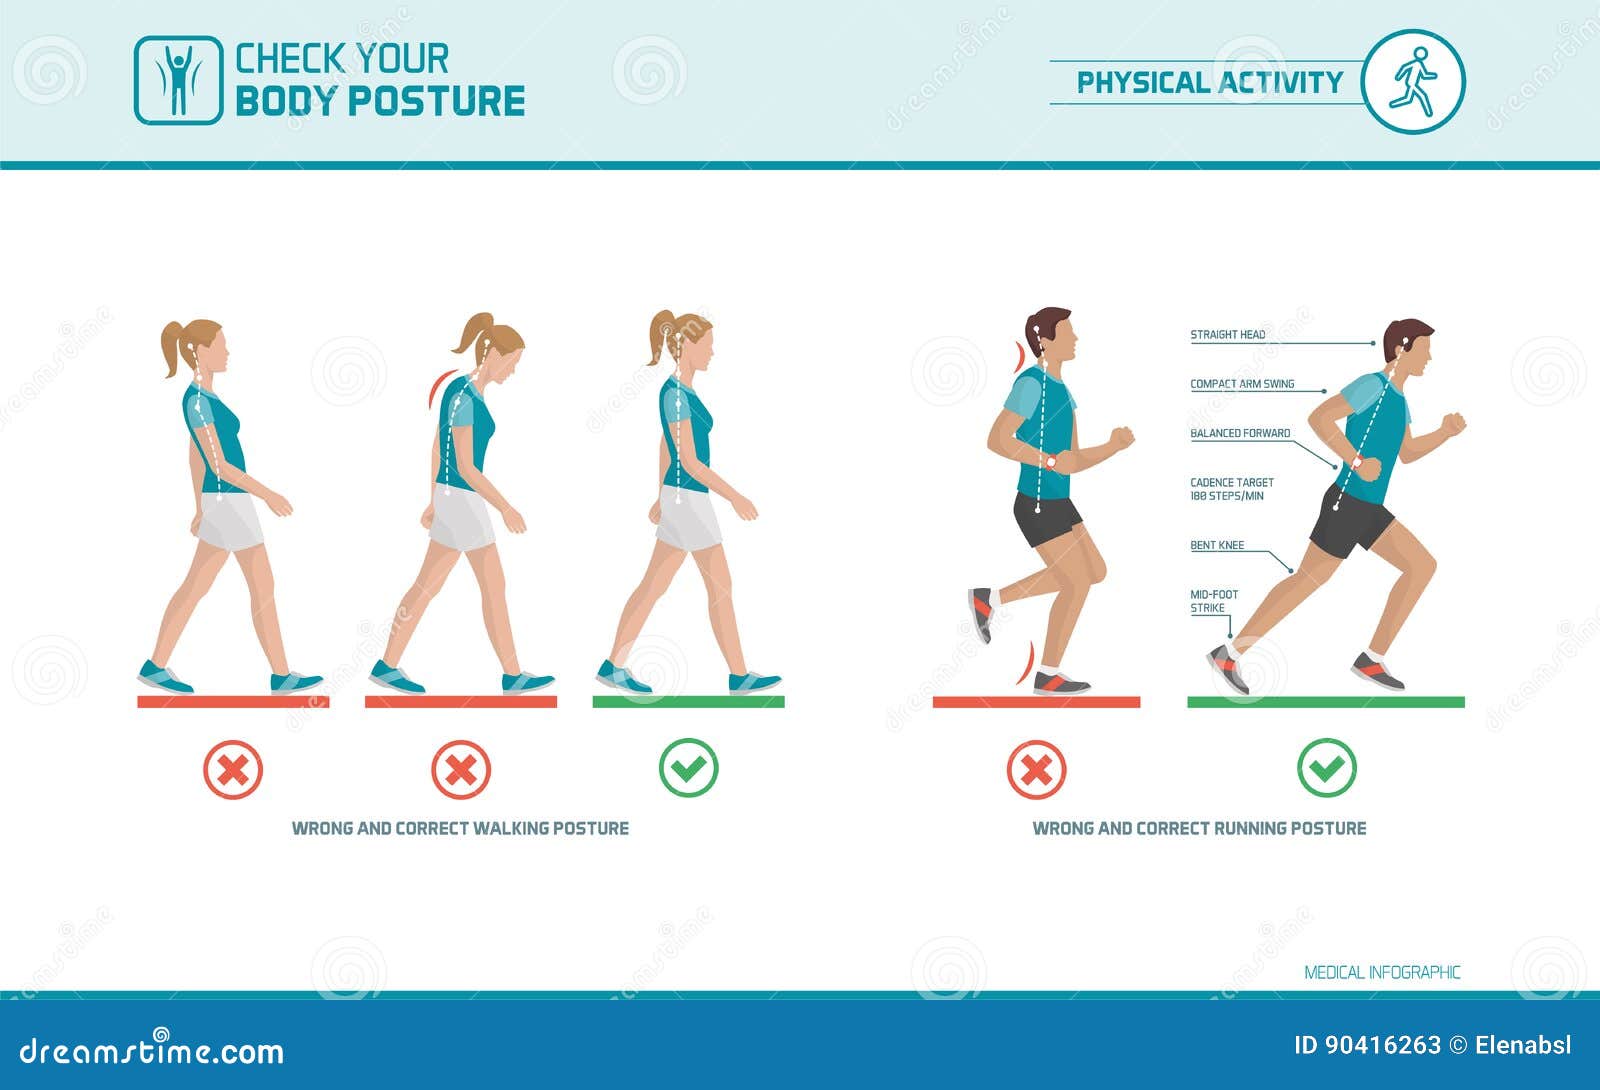 the correct walking and running posture